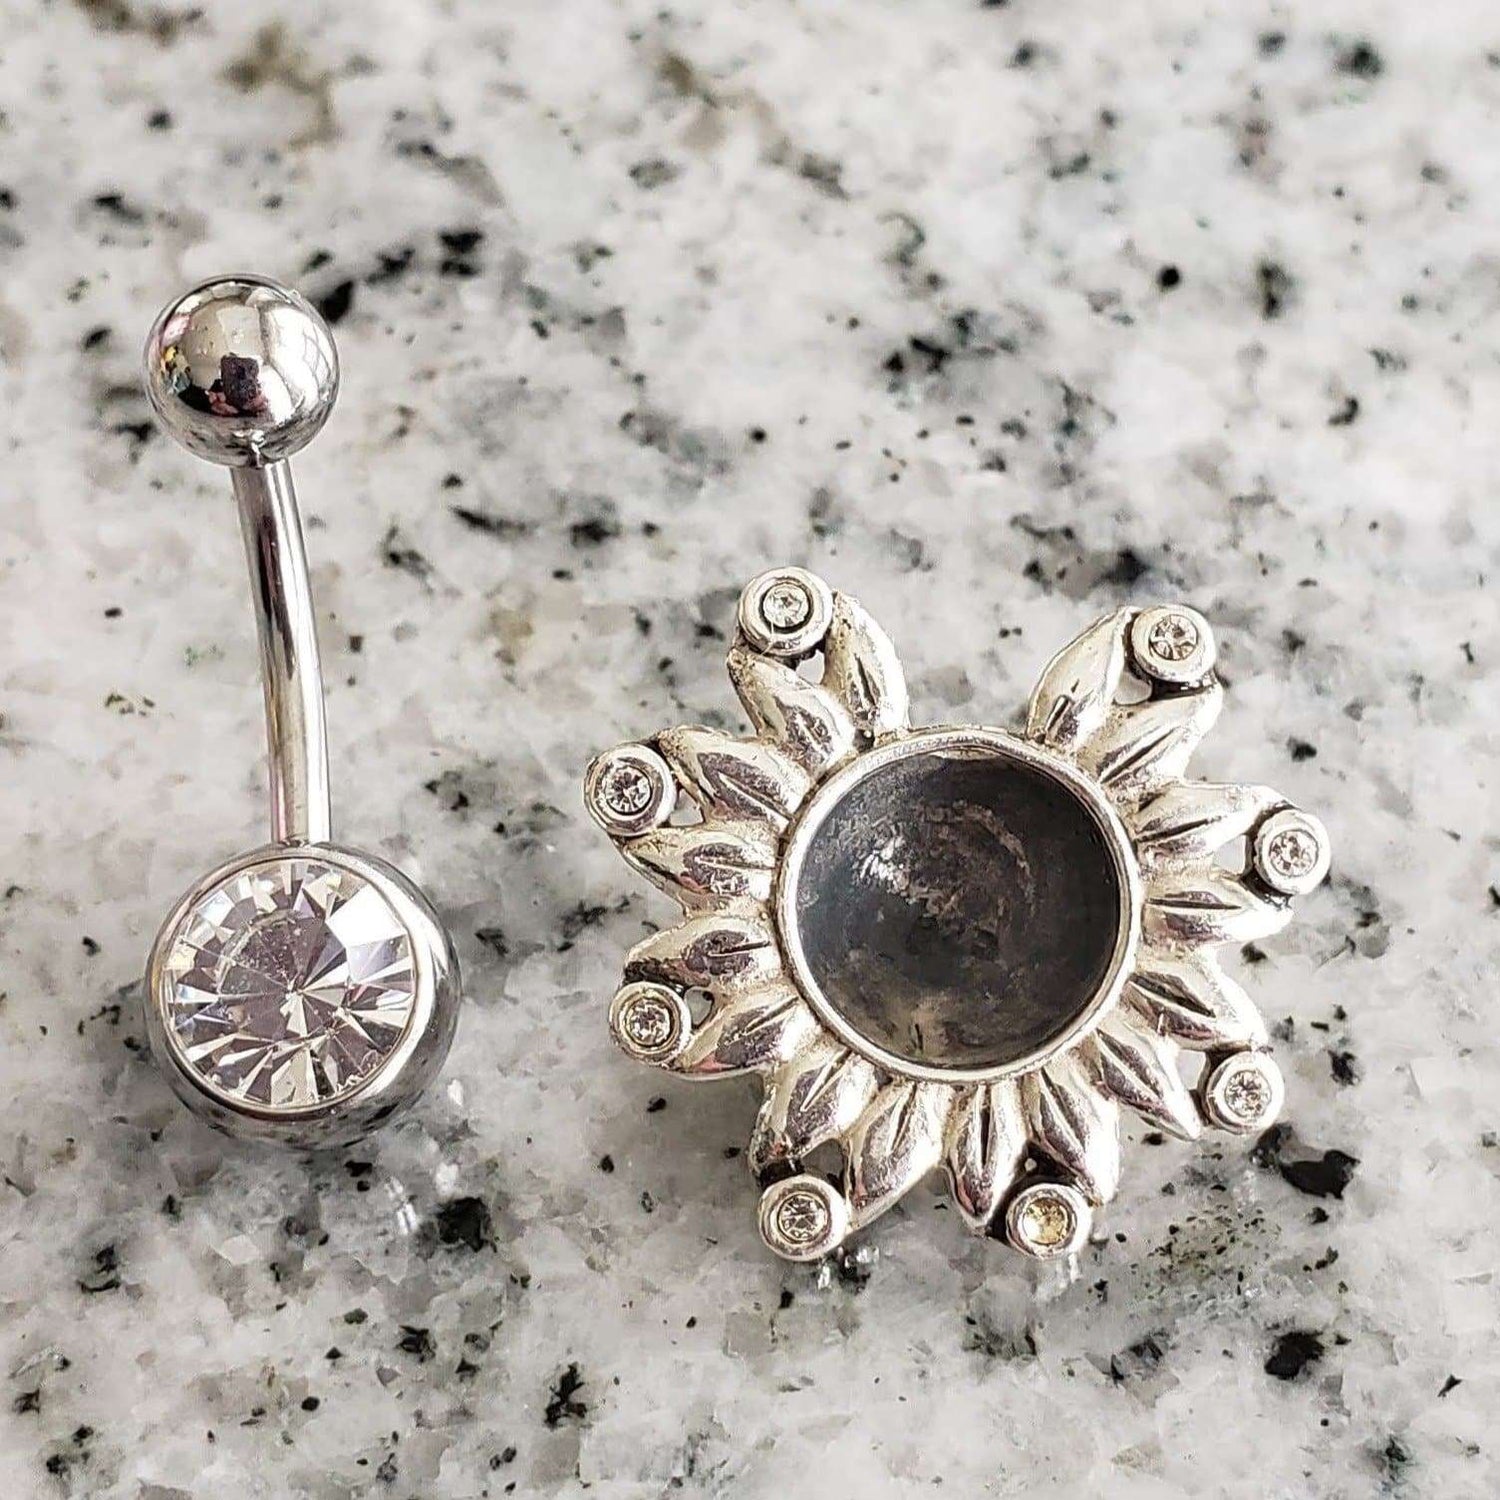 Flower Belly Ring with Navel Shield | Surgical Steel and 925 Silver | White Sapphire Crystal | Canagem.com